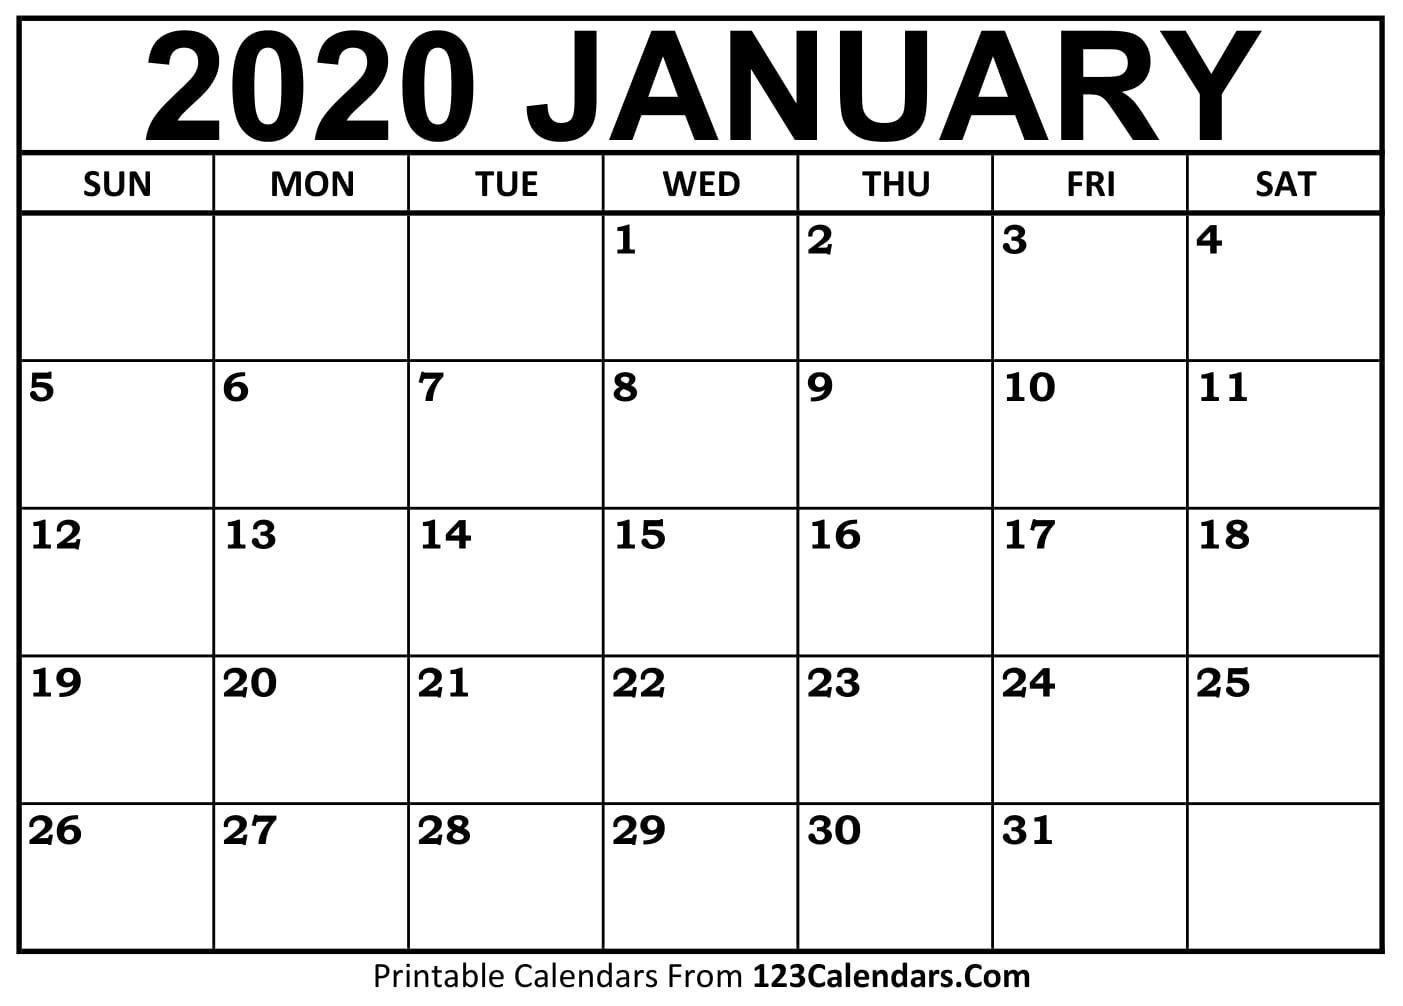 Universal Calendars You Can Edit Online In 2020